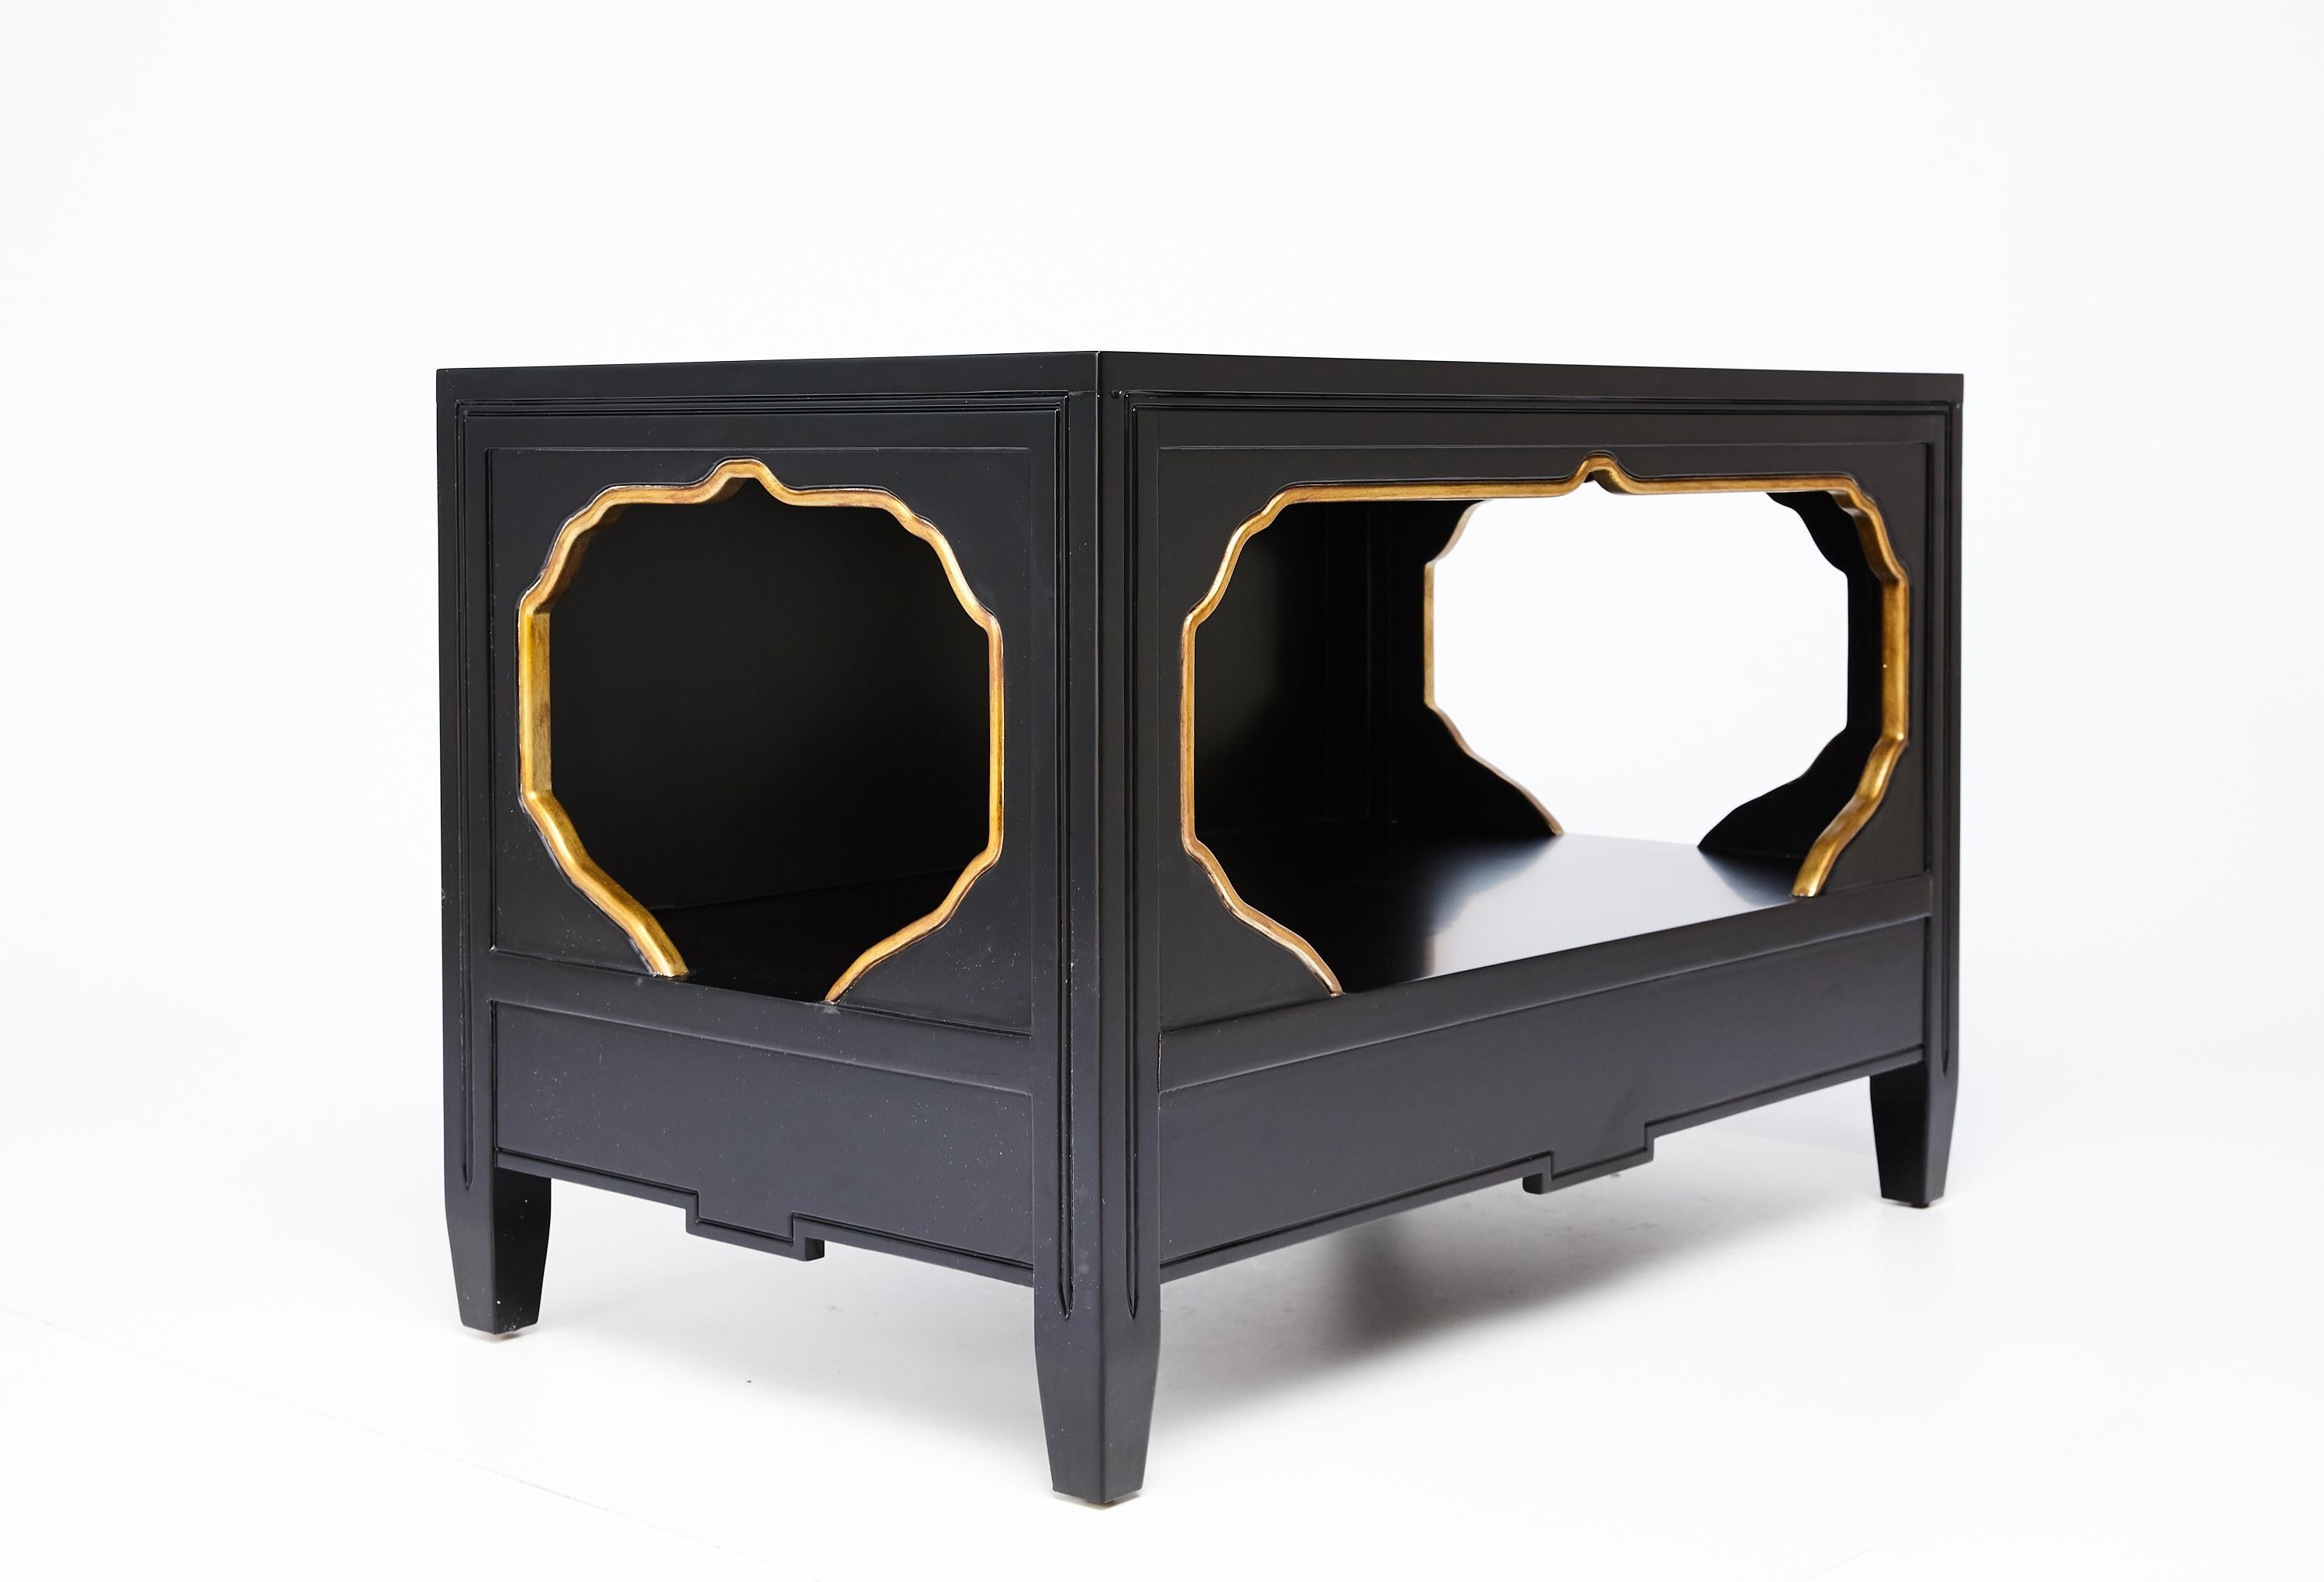 Pair of Kelly Wearstler nightstands / tables, originally designed for the Viceroy Miami, circa 2008 These are an unused pair in black lacquer with gold highlights. The design evokes the vintage glamor of Dorothy Draper's España furniture in a